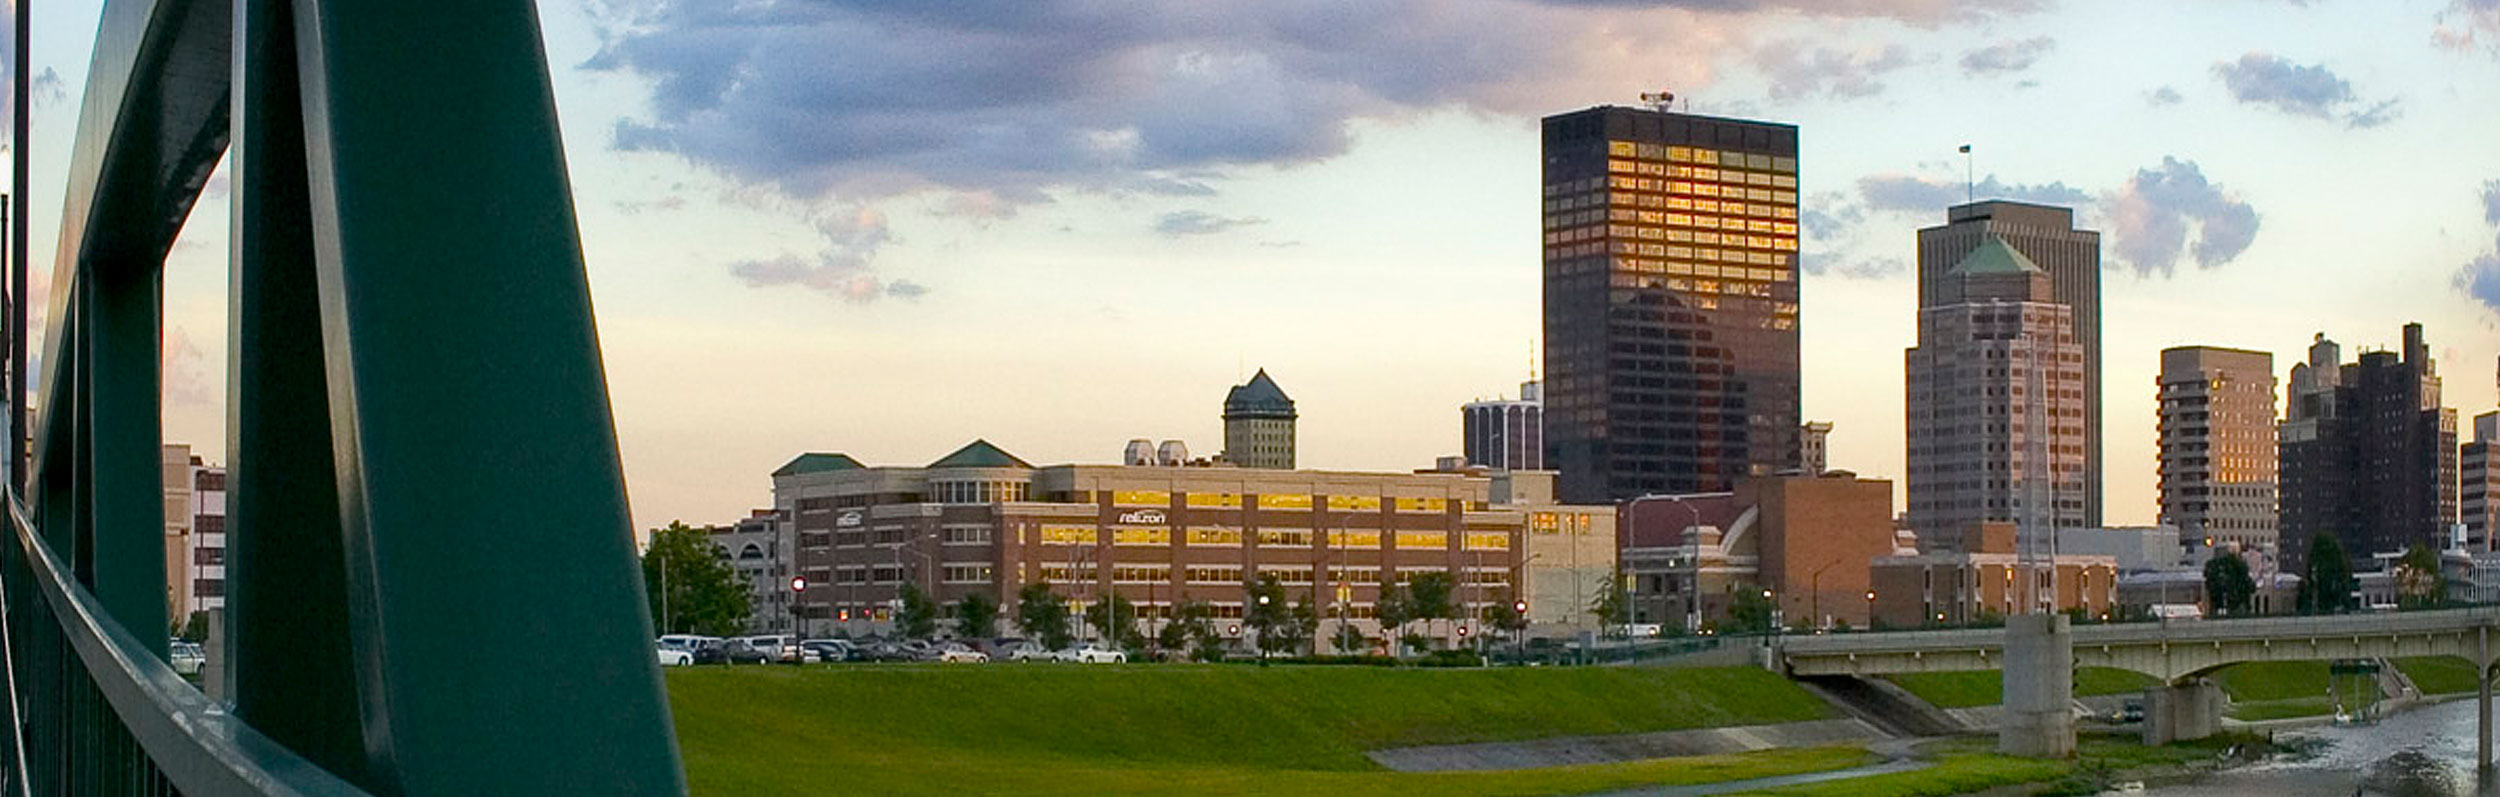 Dayton, OH Ranks 9th Nationally in Employment Outlook for 2020 Main Photo